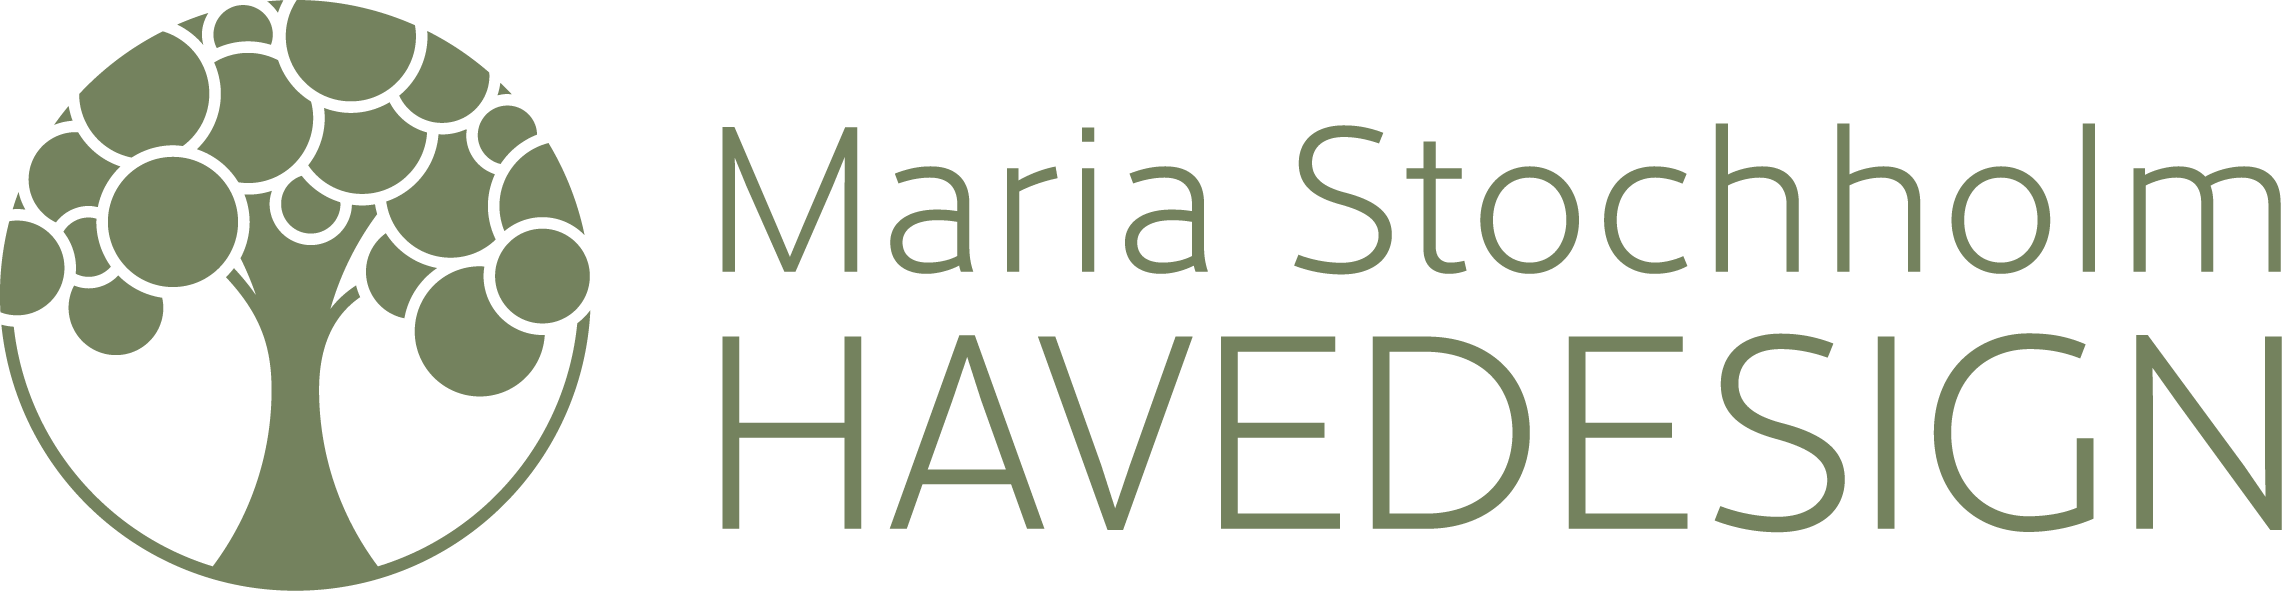 Maria Stochholm Havedesign